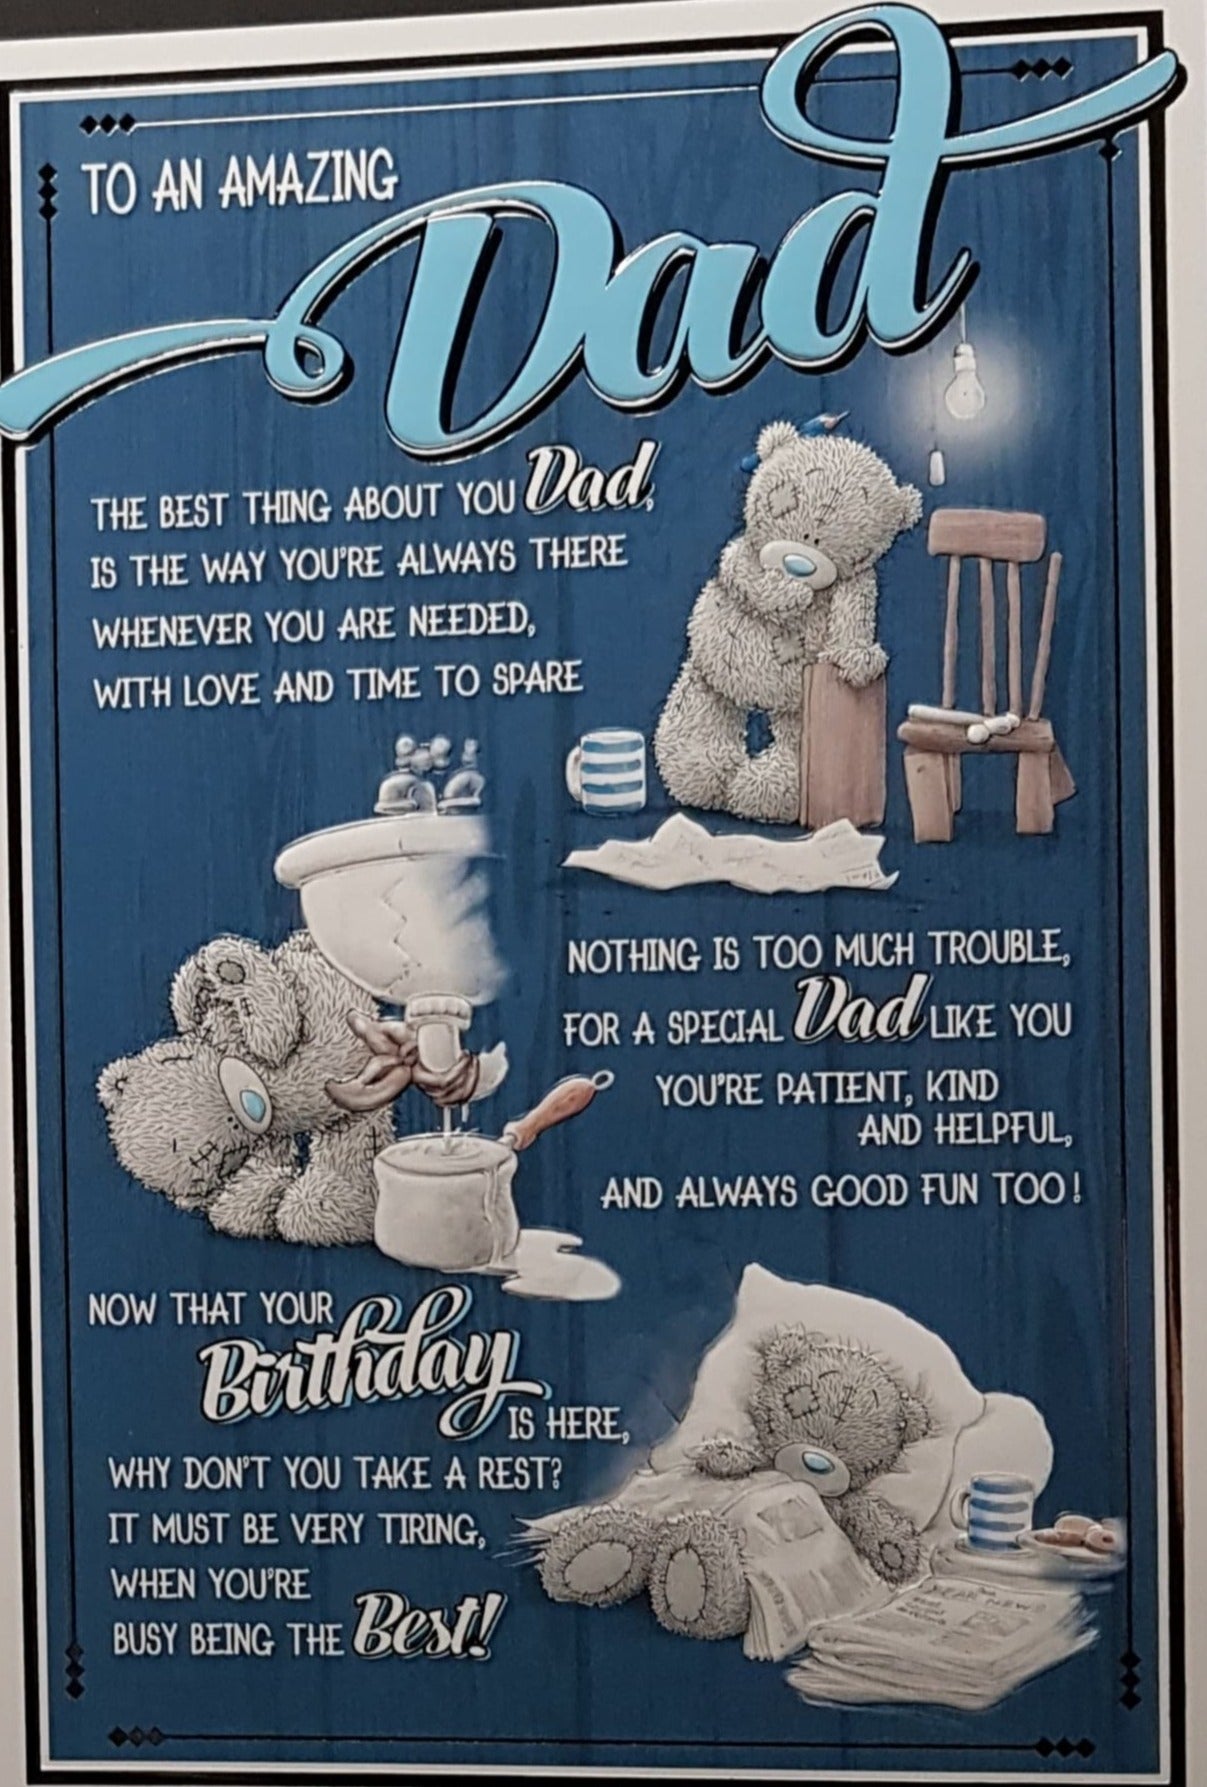 Birthday Card - Dad / The Best Thing About You Dad...